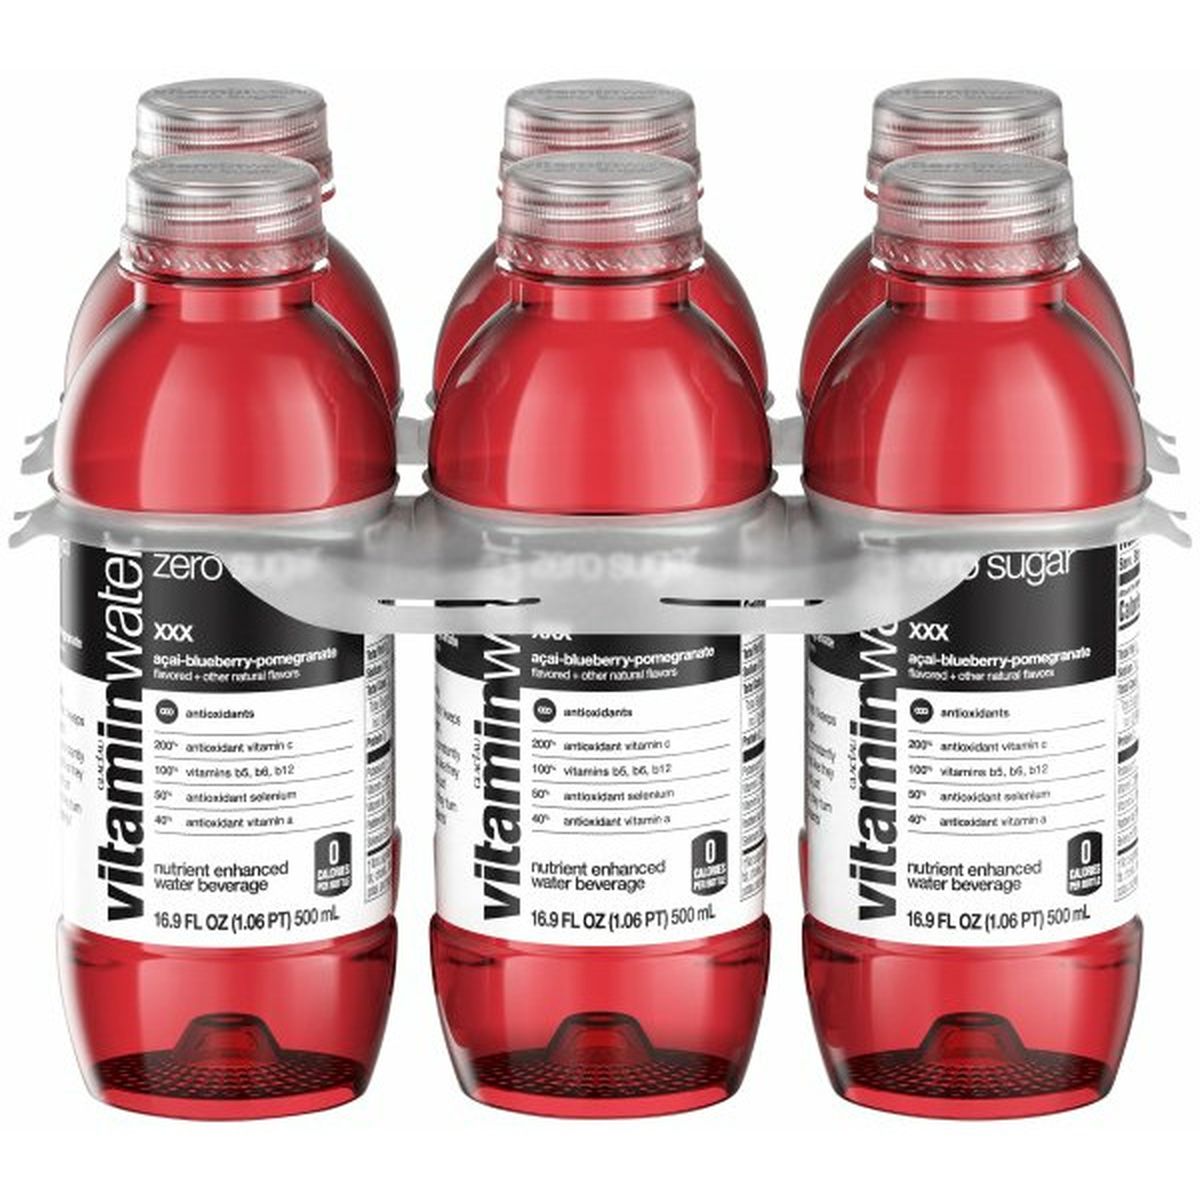 Calories in Glaceau Vitaminwater Zero Calorie Flavored Water